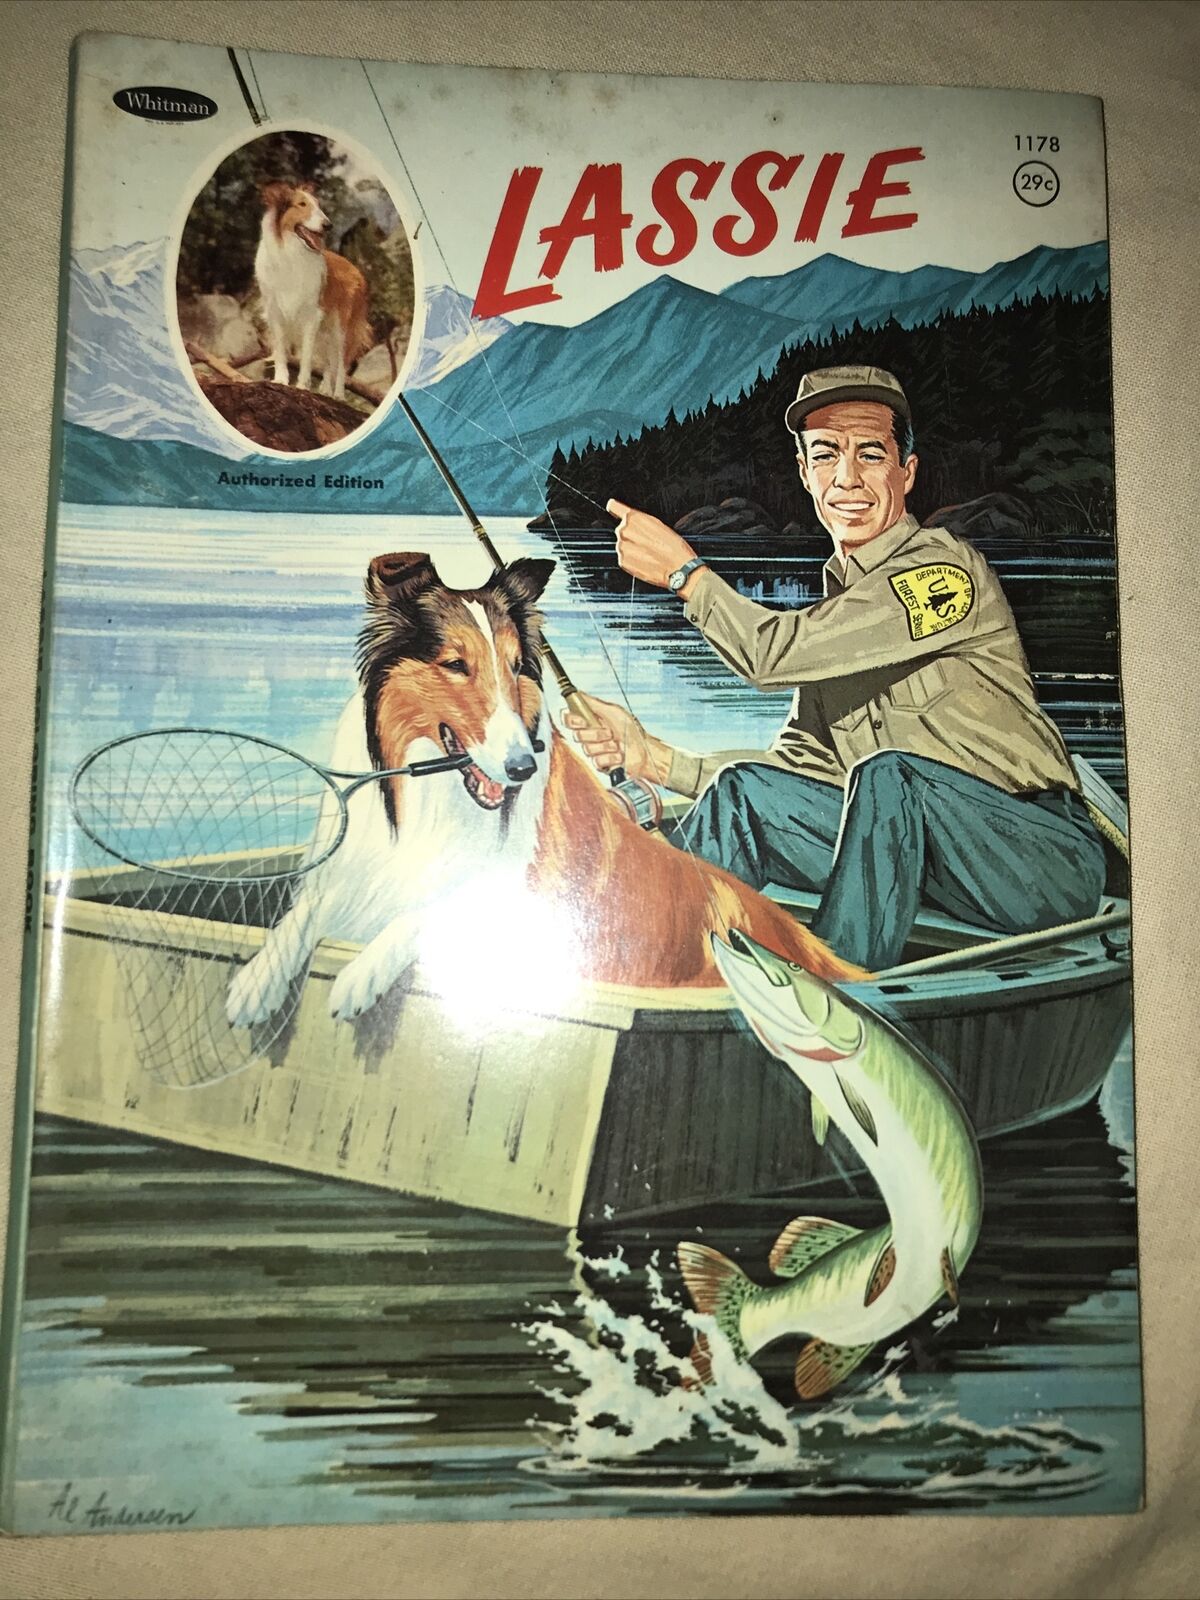 Vintage 1966 LASSIE Coloring Book 1178 Whitman Publishing Wrather Corp. UNUSED